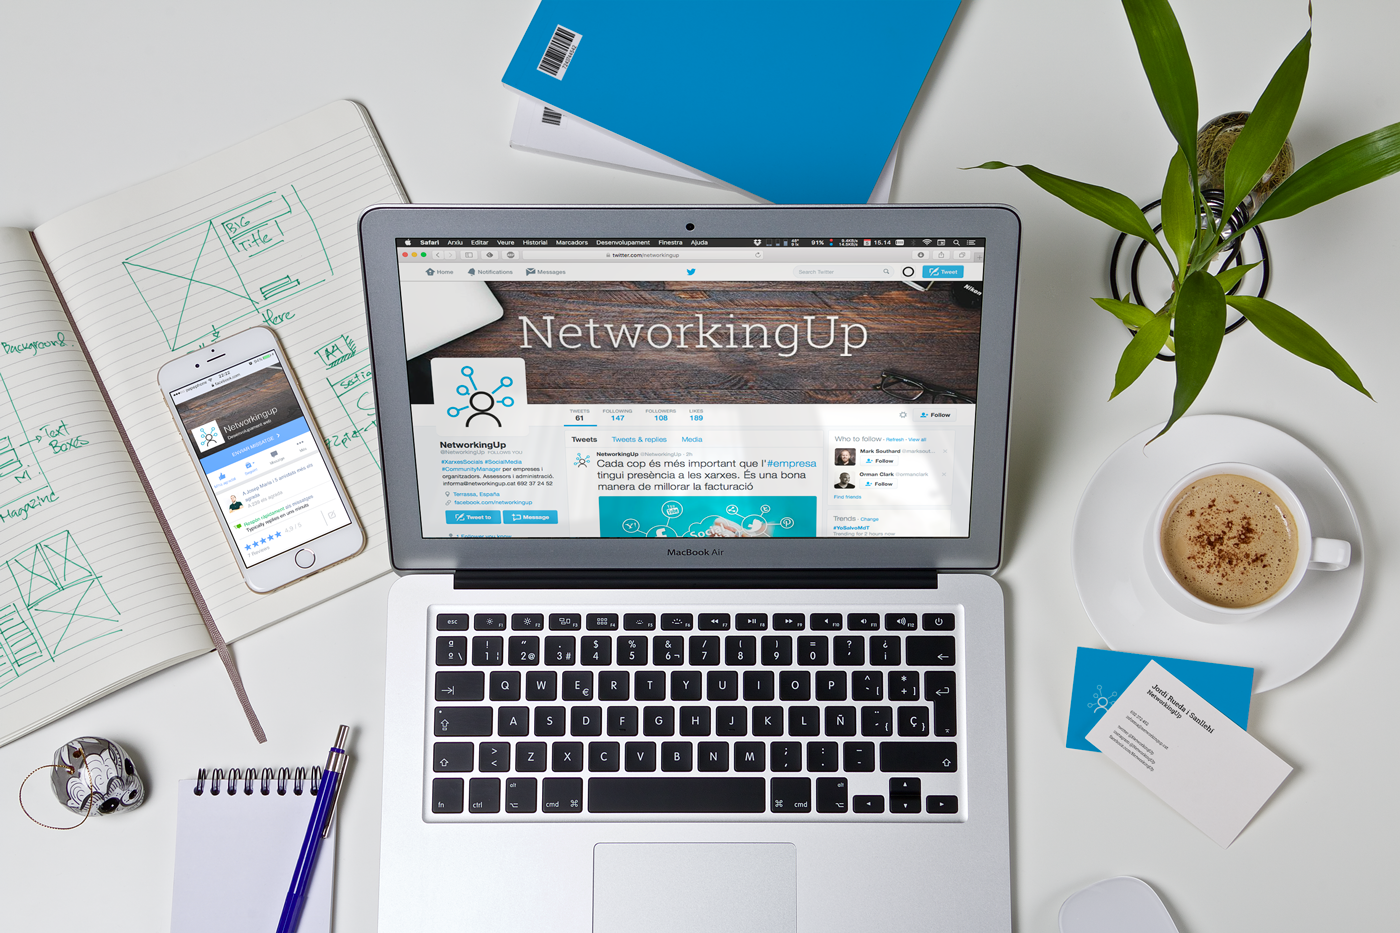 networkingup networking community manager management community social network